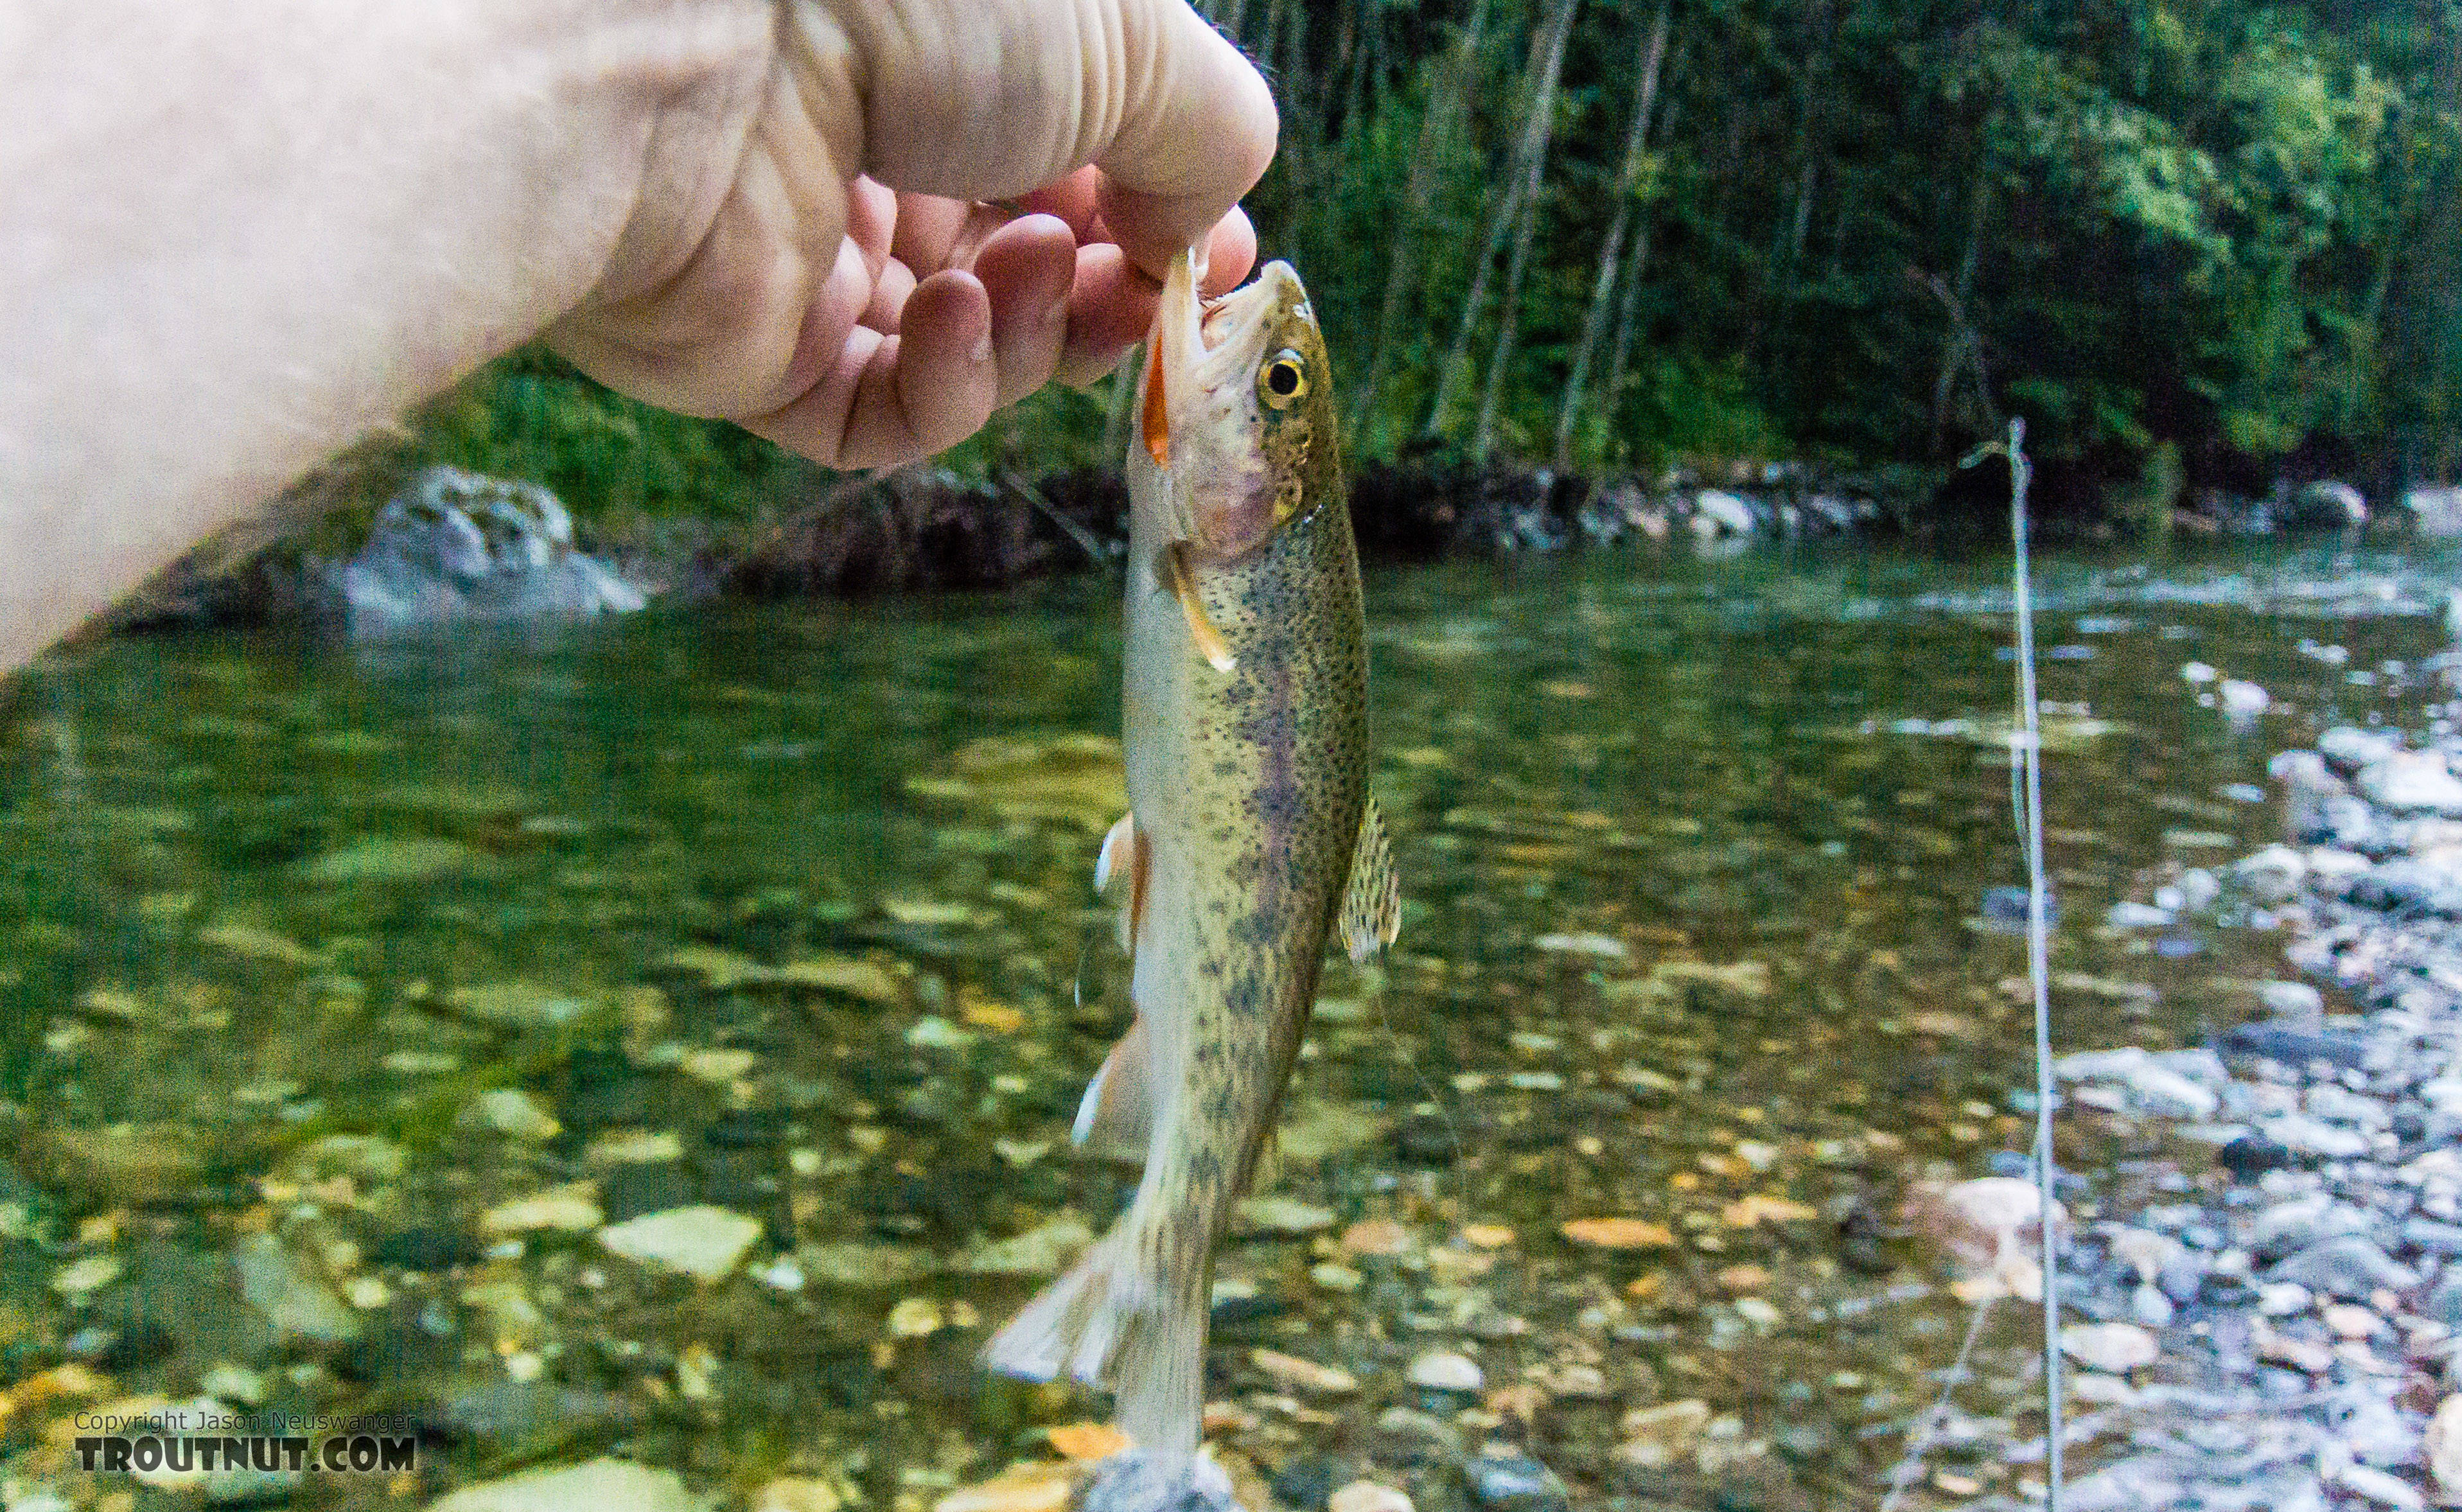 Pretty little Coastal Cutthroat. From the South Fork Snoqualmie River in Washington.